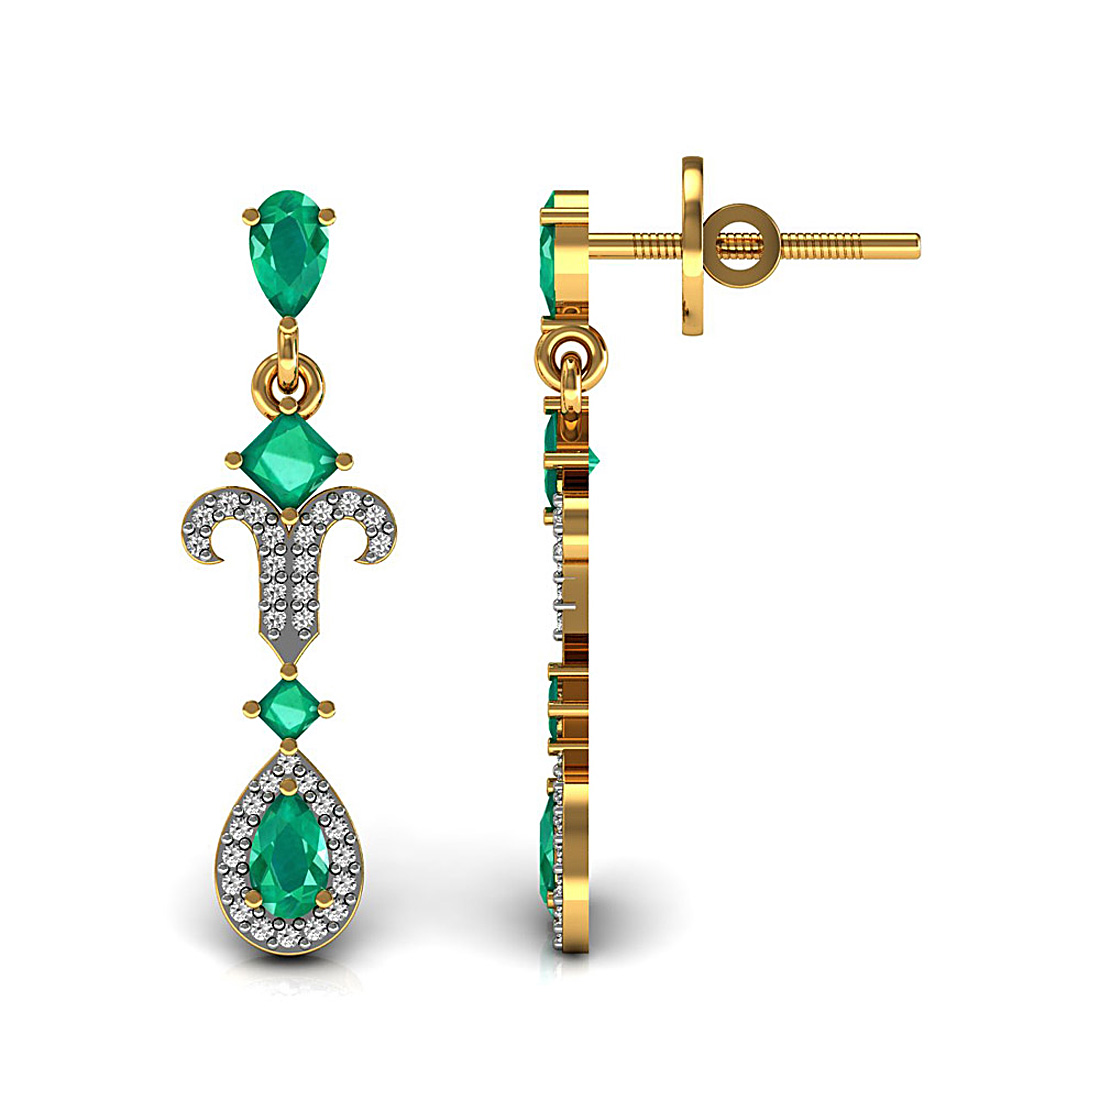 Dangle earrings made in 18k solid yellow gold and adorned with natural emerald and real diamond.